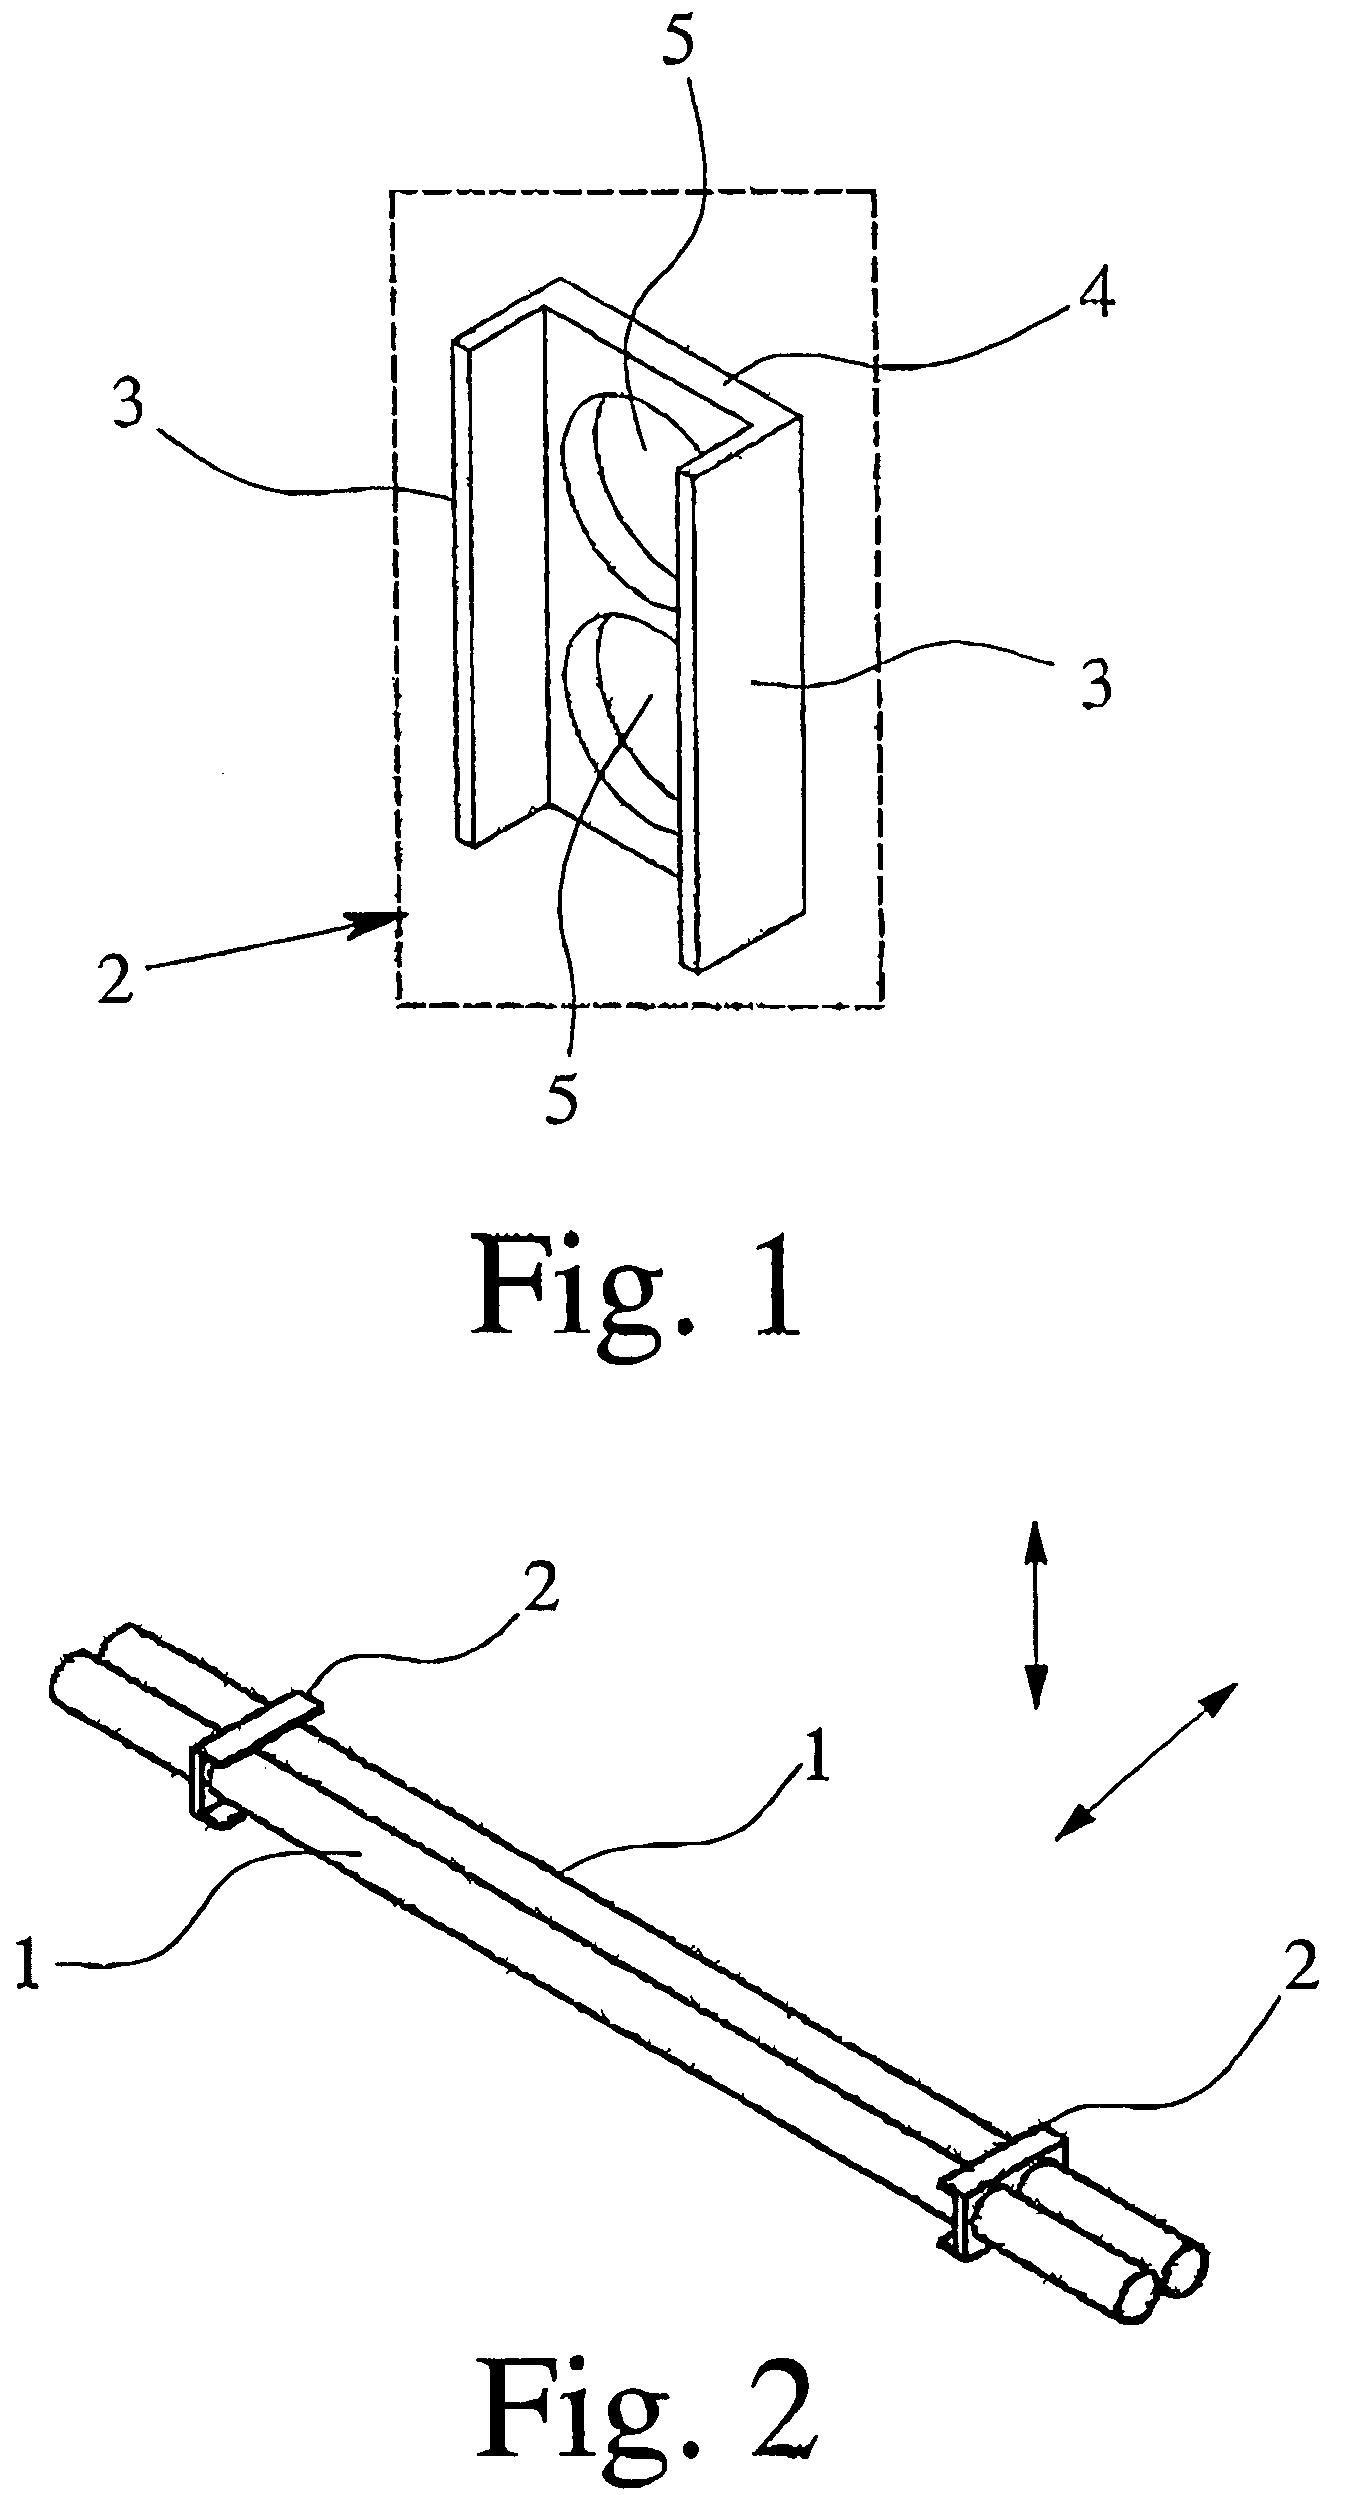 Mass flow meter composed of two measuring tubes with a connecting device between them